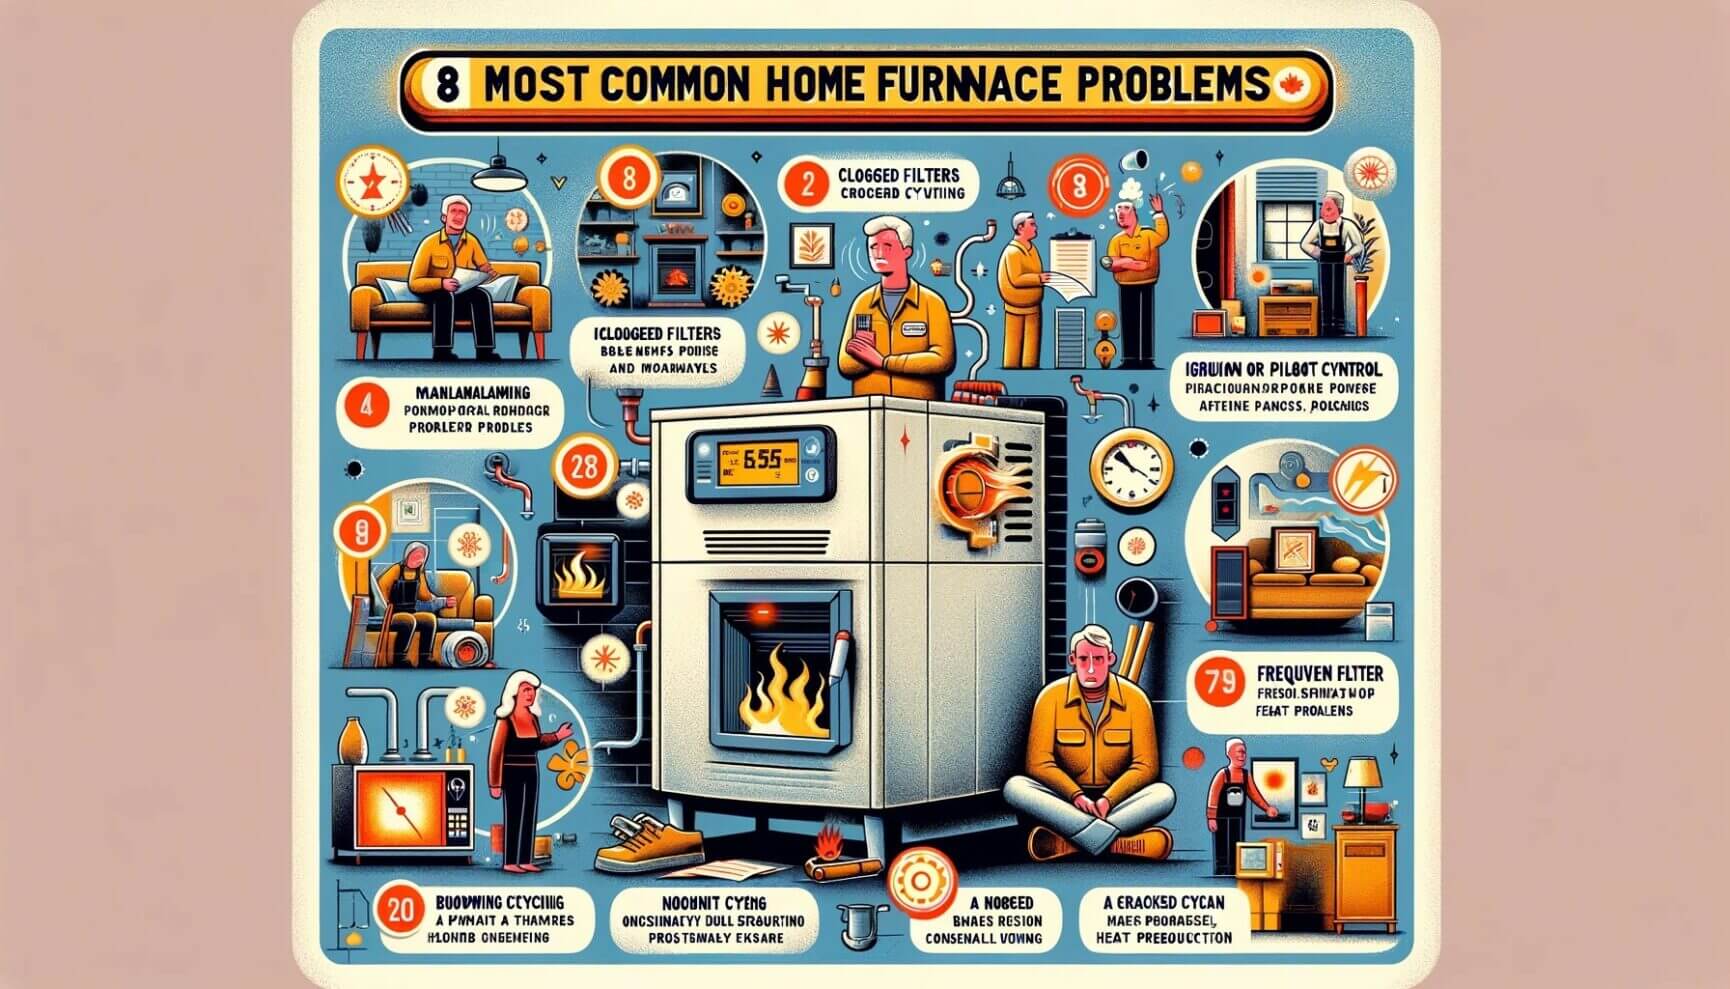 The most common home furnace problems.